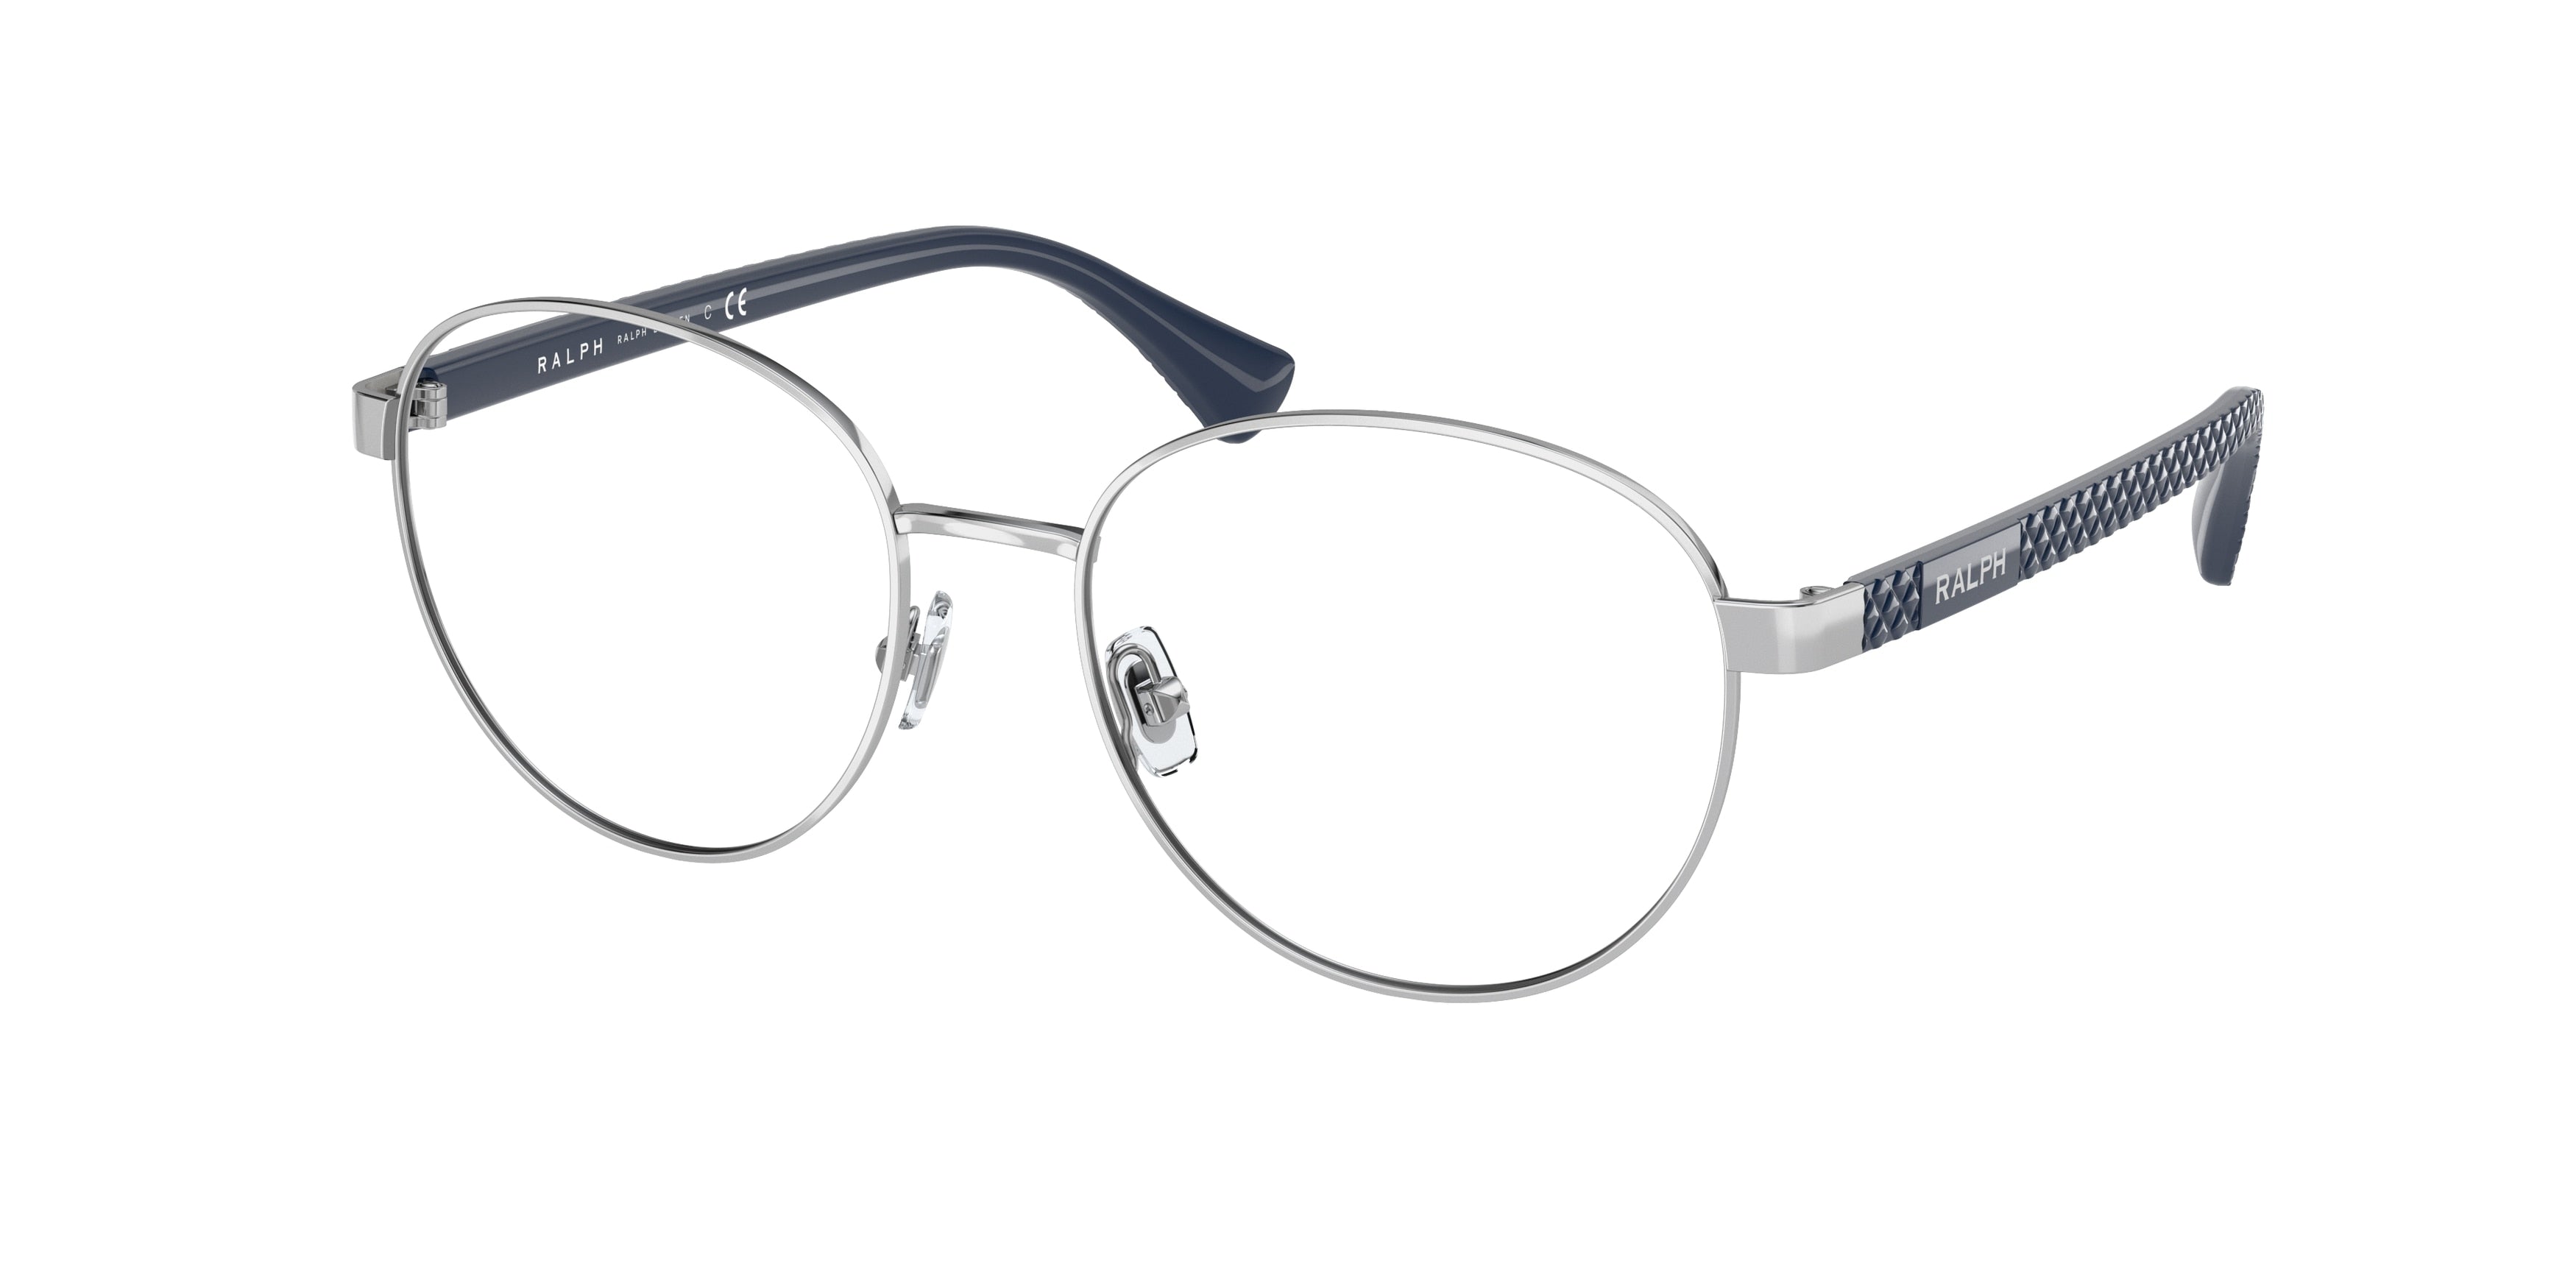 Ralph RA6050 Round Eyeglasses  9433-Shiny Silver 53-140-17 - Color Map Silver